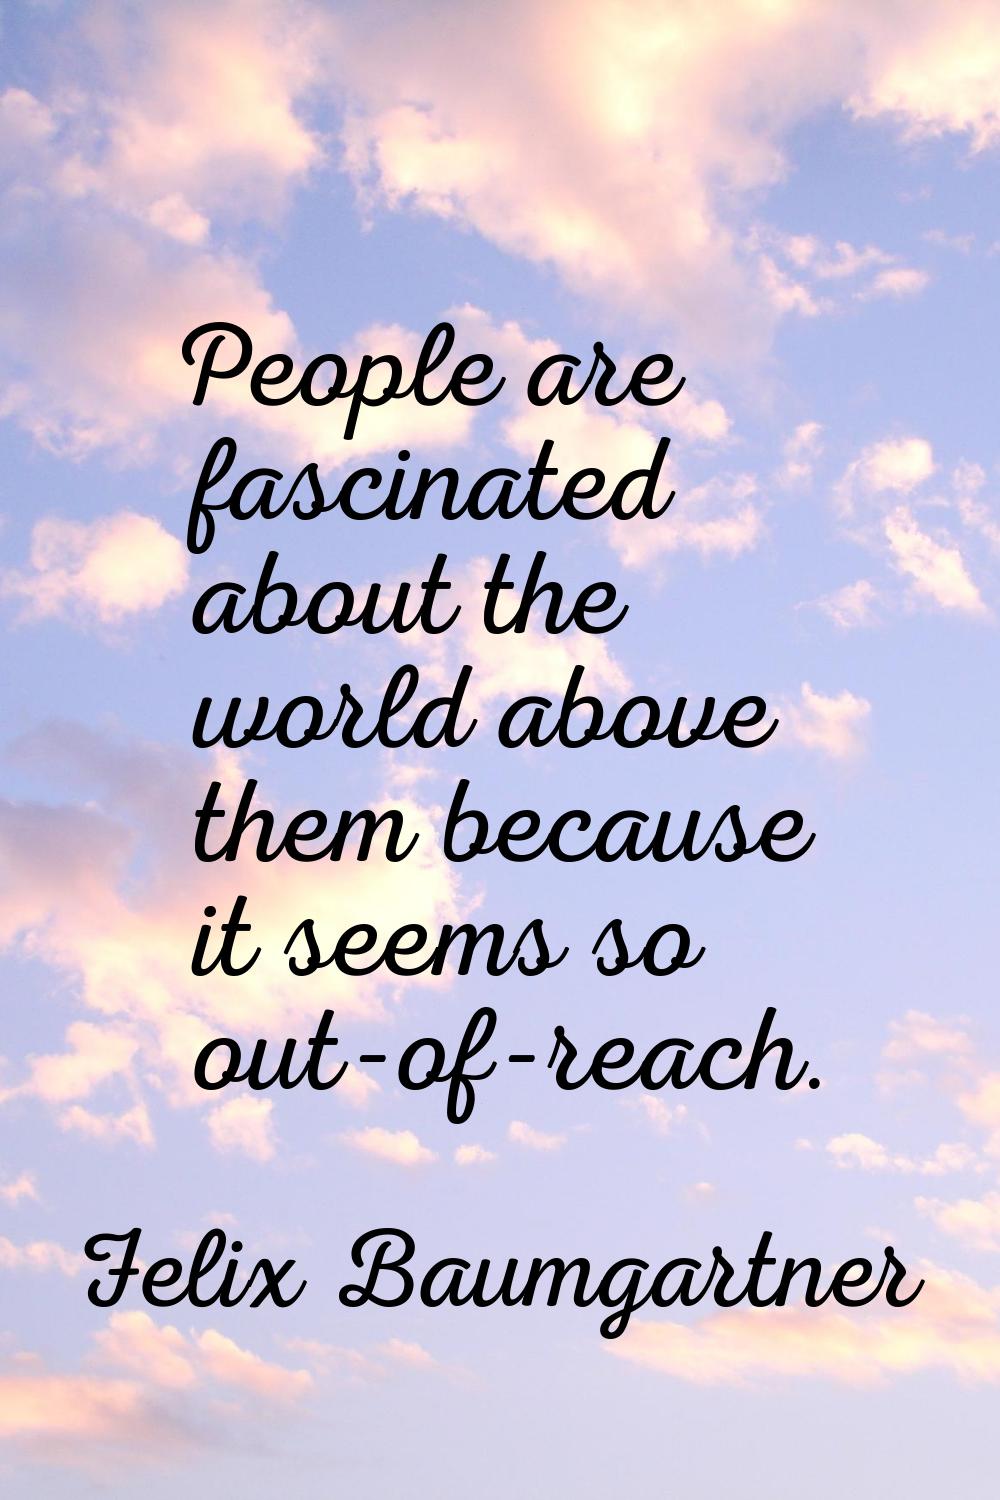 People are fascinated about the world above them because it seems so out-of-reach.